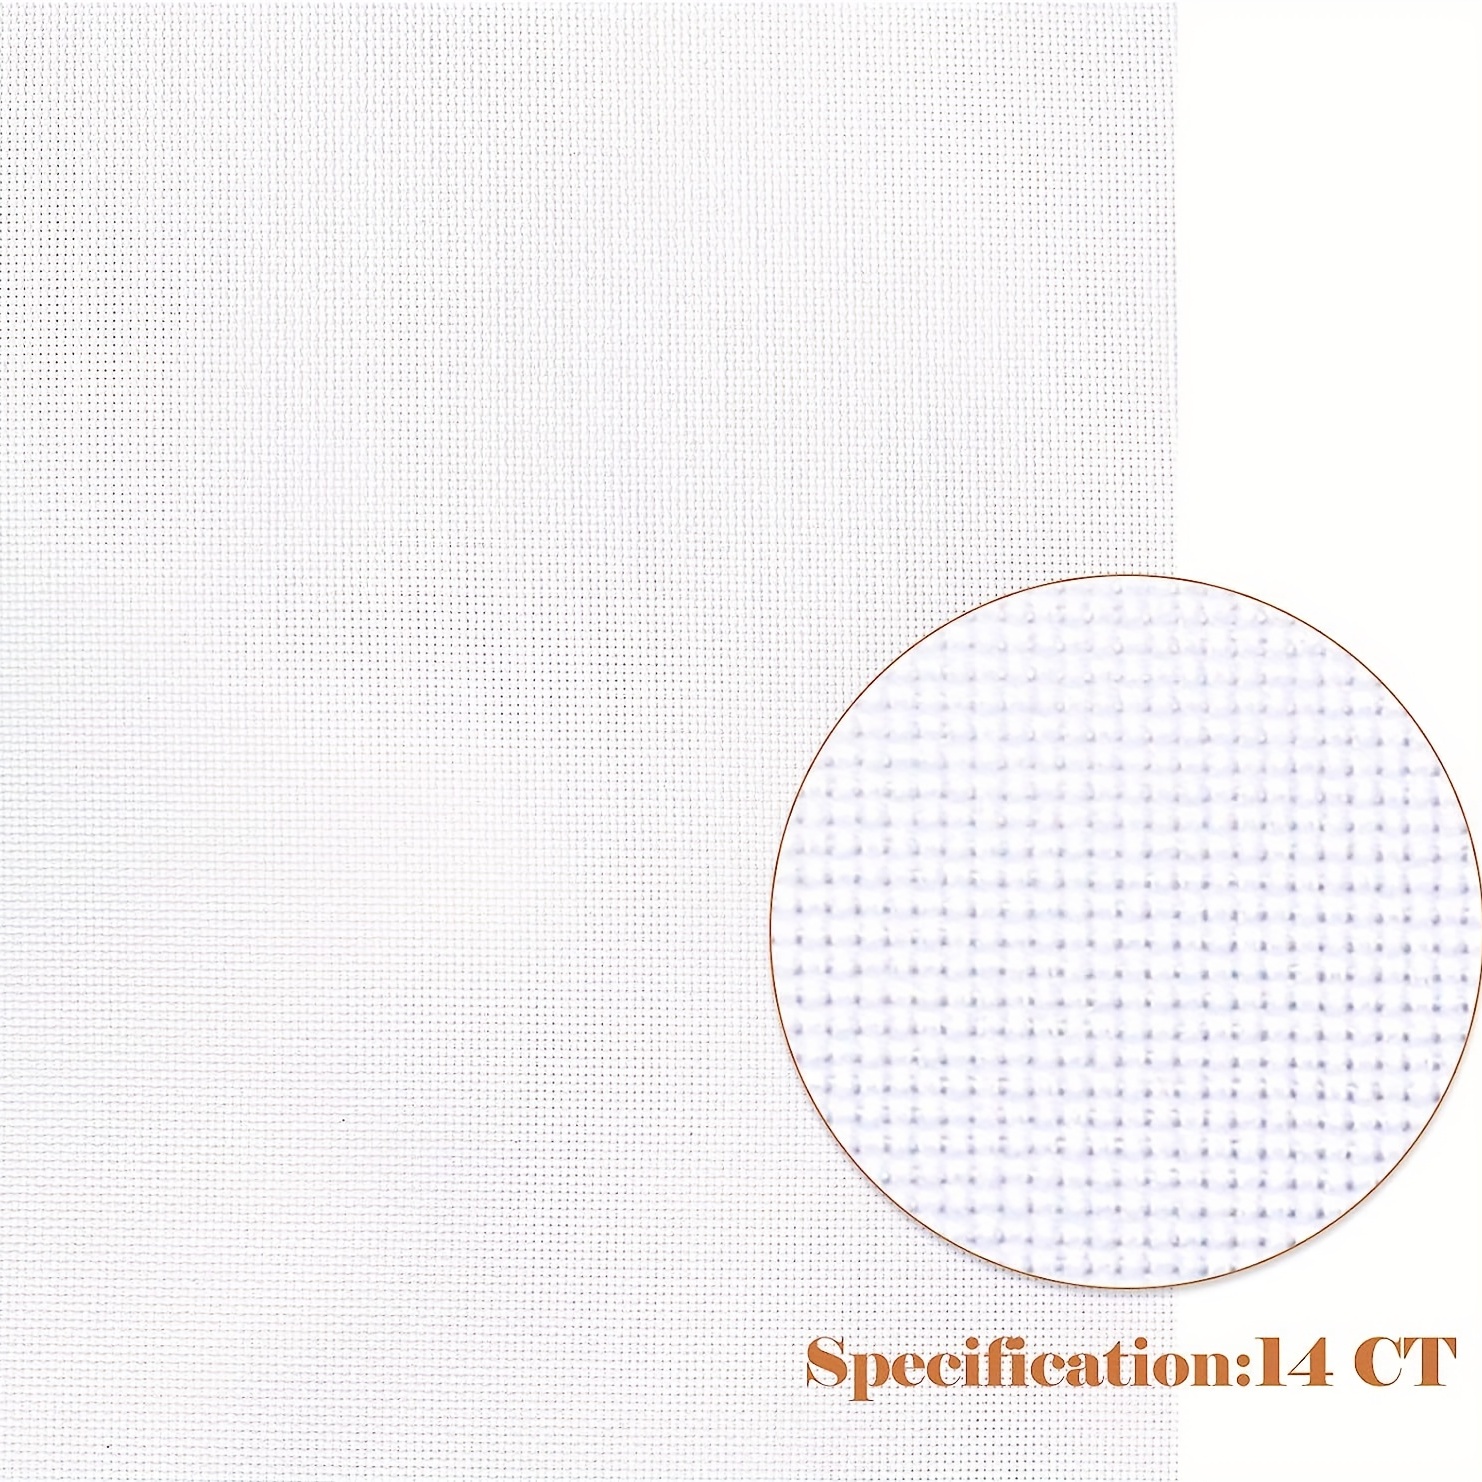 XSTITCHBUY 6 Count Aida Cloth Embroidery Counted Cross Stitch Fabric,  White, 59 inch W x 19 inch L